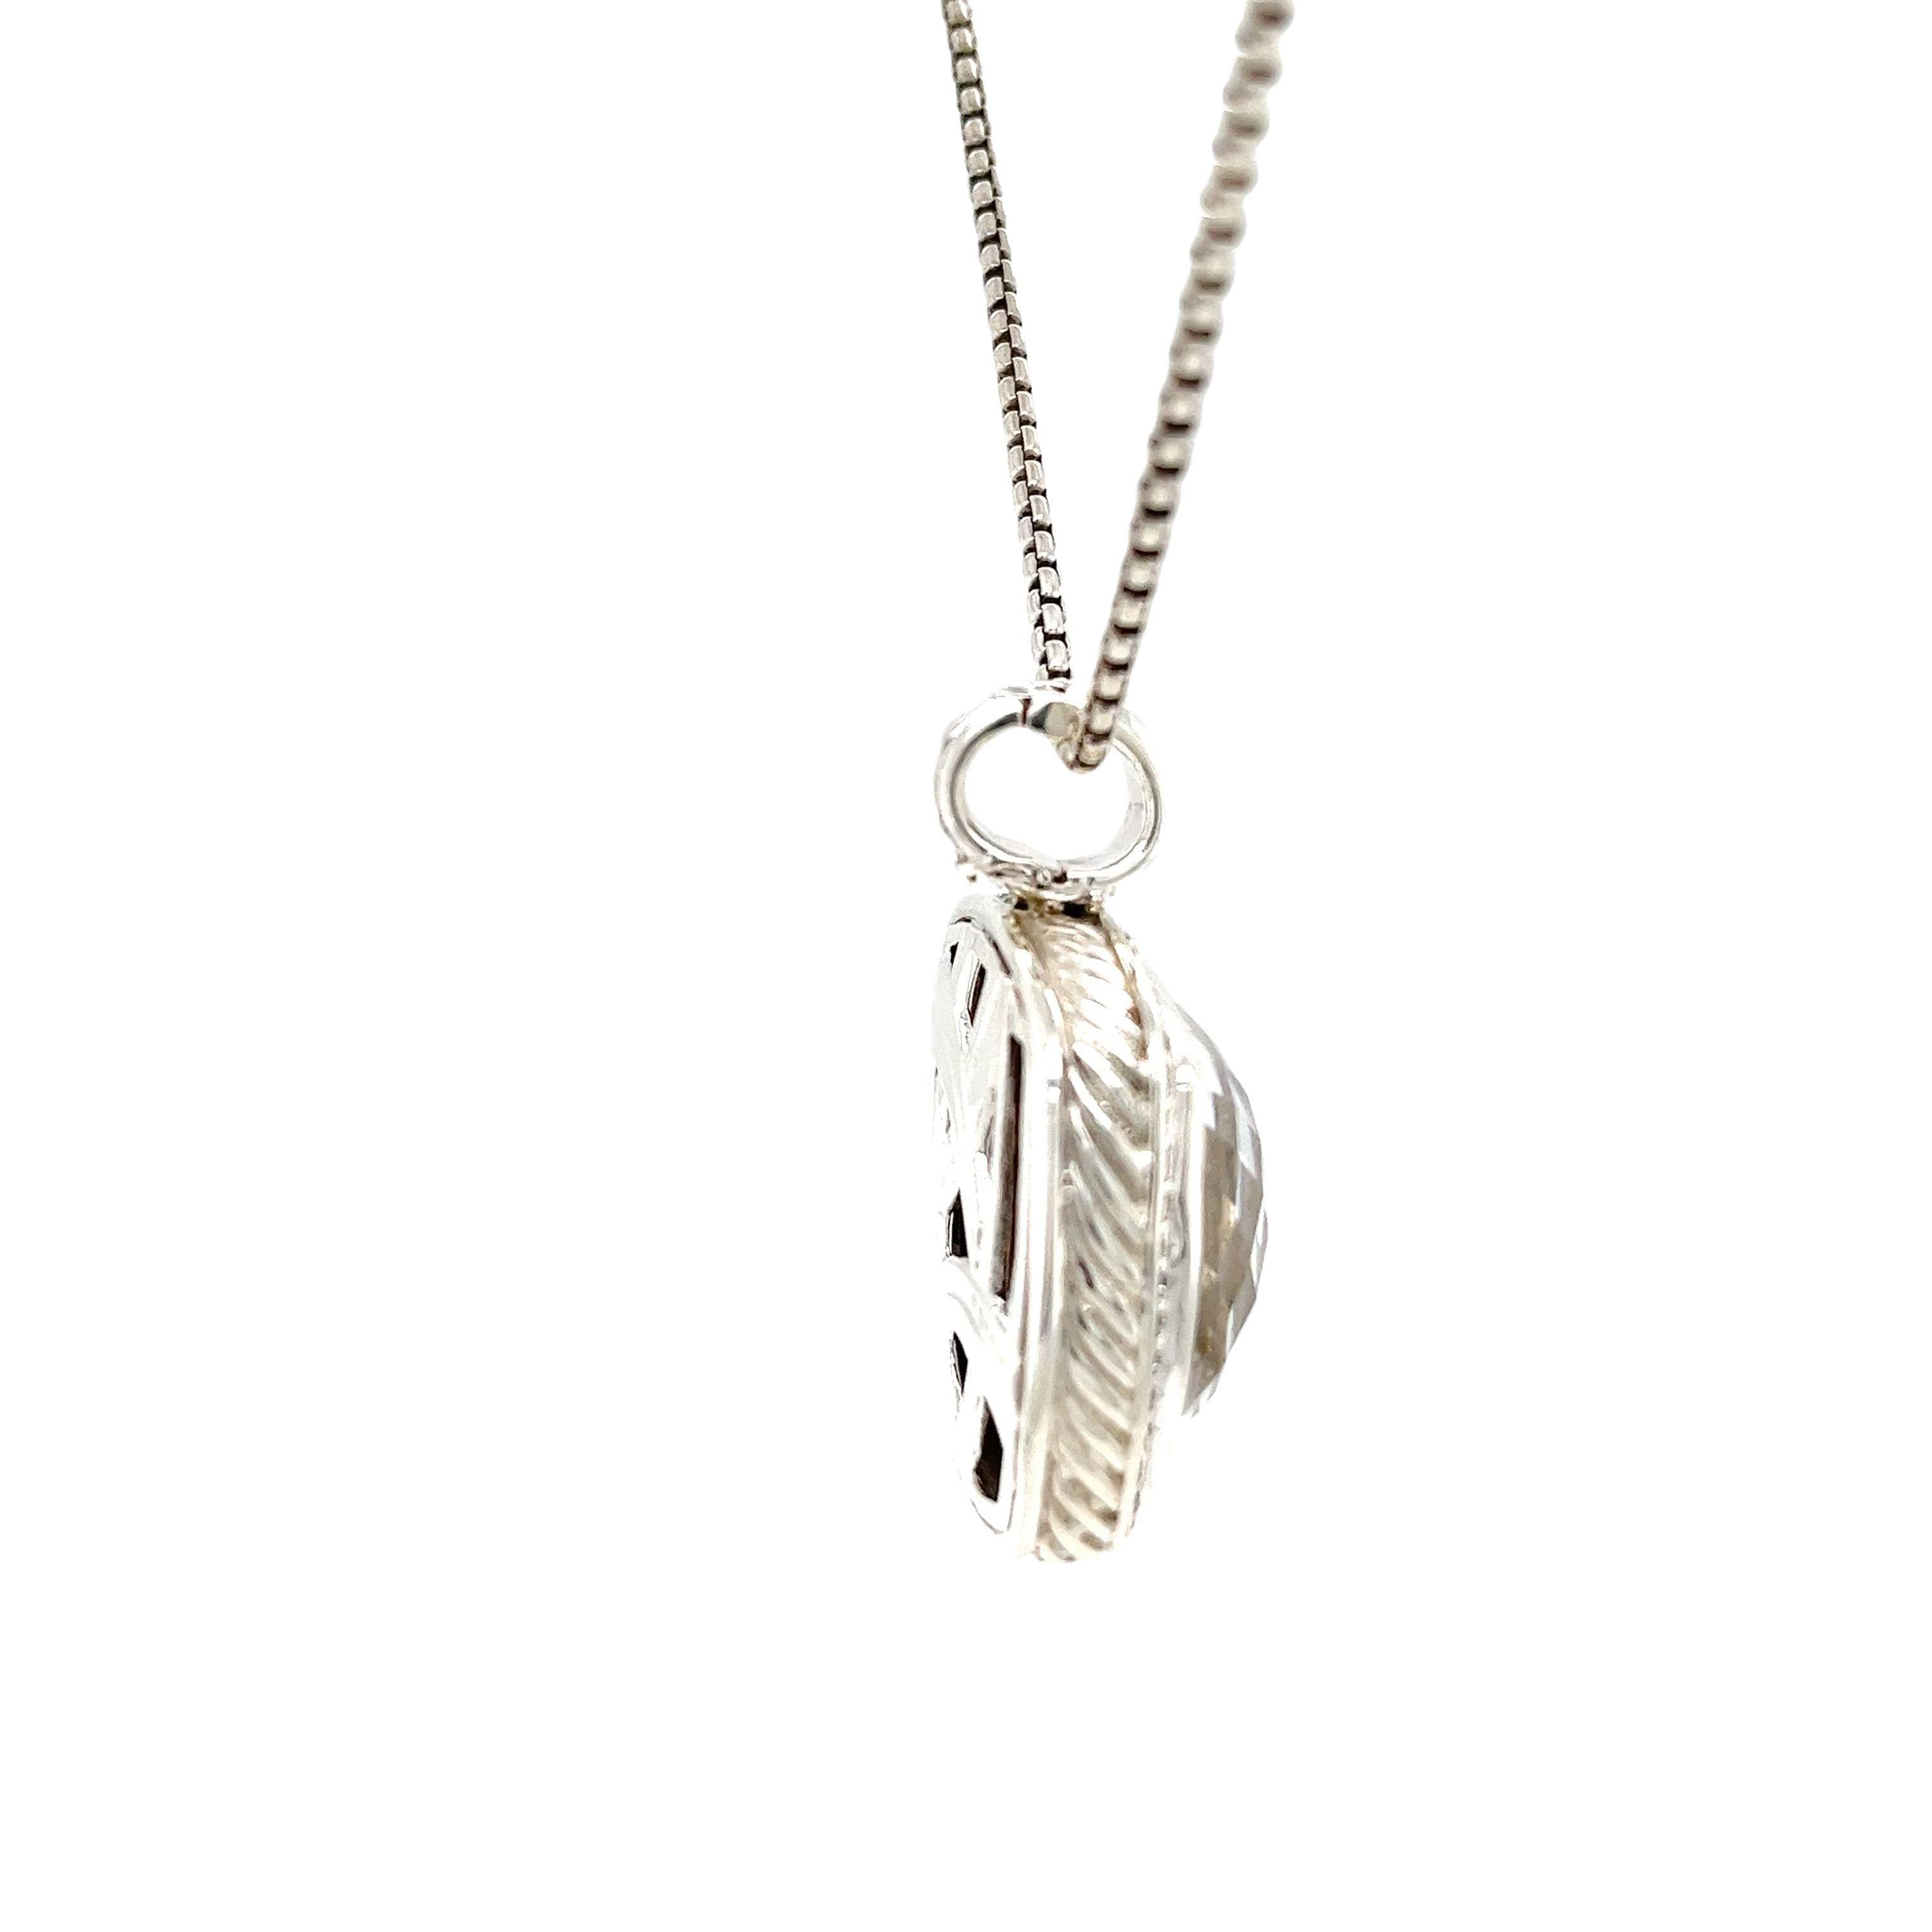 David Yurman Albion pendant with cushion shape smoky onyx and 0.25ct pavé round brilliant cut diamonds set in 925 sterling silver, suspended from David Yurman Silver Chain 925, 
17